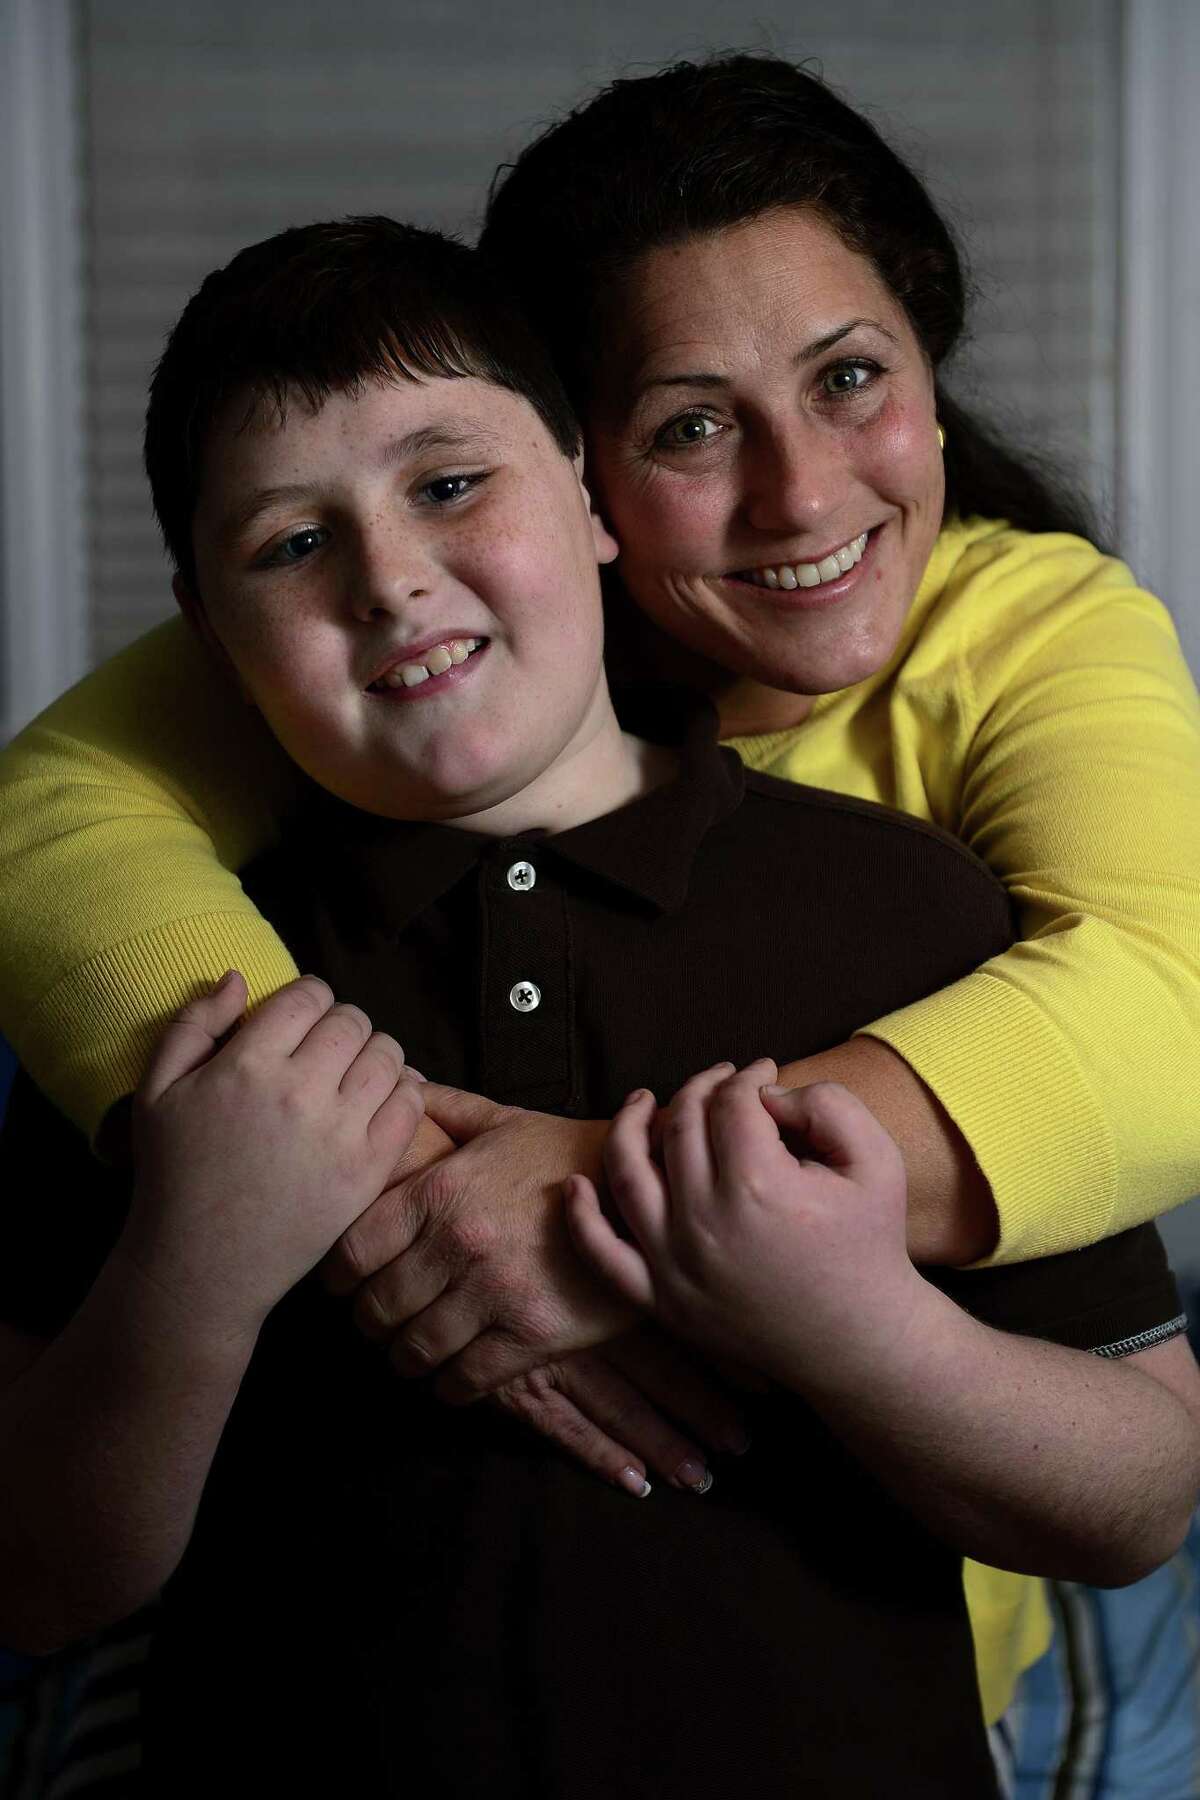 Julie Shafer and her son Caleb Shafer Courder, 10, they talk about Caleb's Asperger's diagnosis at their home in Quaker Hill, Connecticut on Wednesday, December 19, 2012. AAron Ontiveroz, The Denver Post